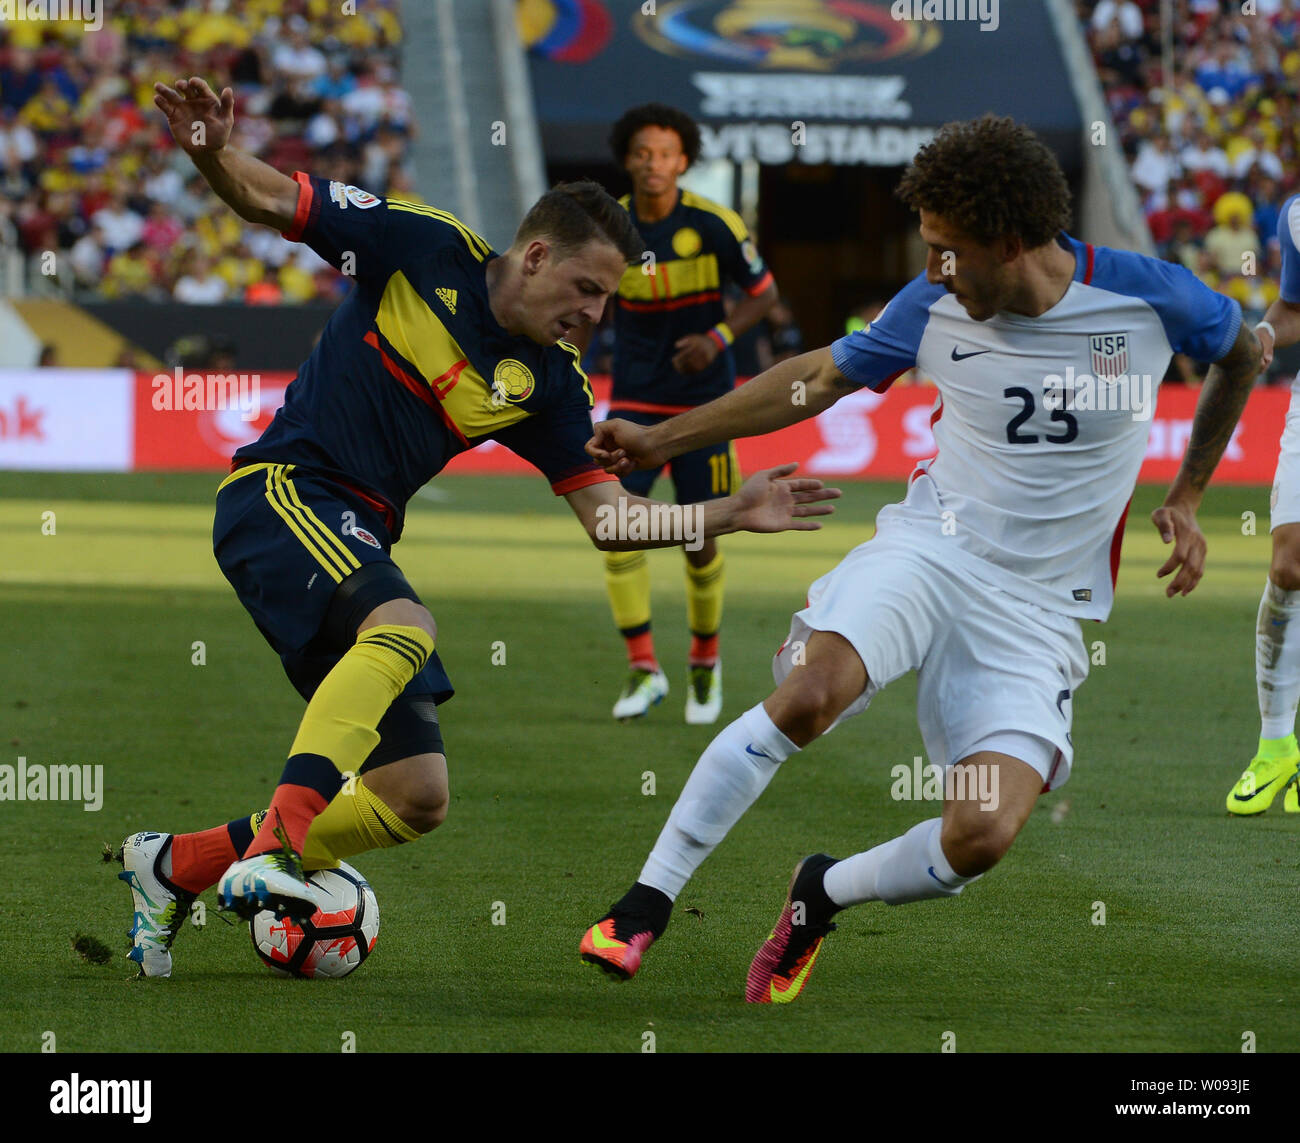 Colombia's Santiago Arias (4) and USA's Fabian Johnson (23) try and control the ball in the second half at COPA America Centenario at Levi's Stadium in Santa Clara, California on June 3, 2016.  Colombia won 2-0.   Photo by Terry Schmitt/UPI Stock Photo